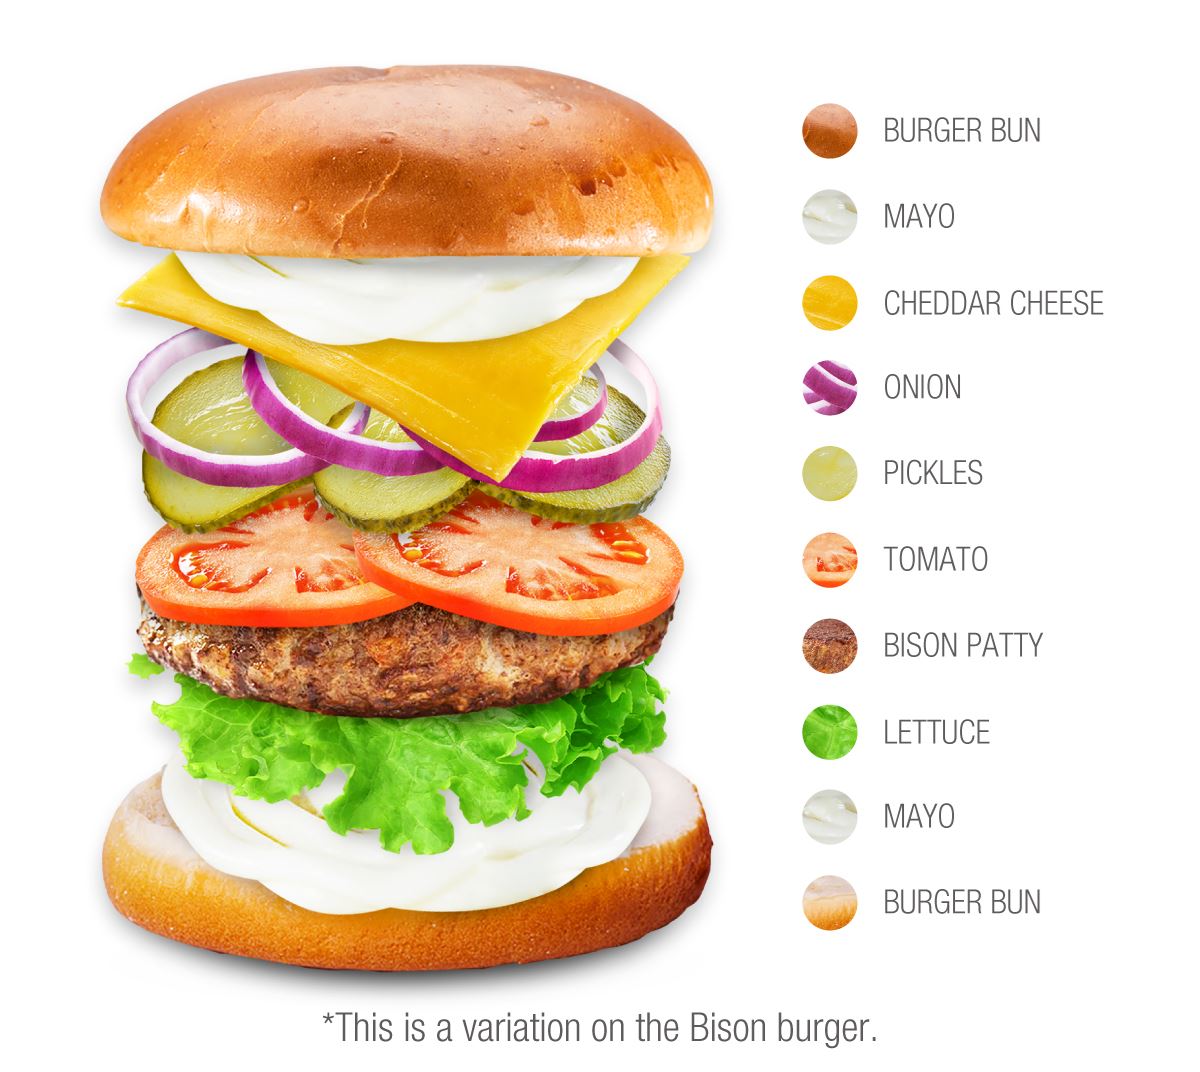 Bison Burger | Traditional Burger From United States of America